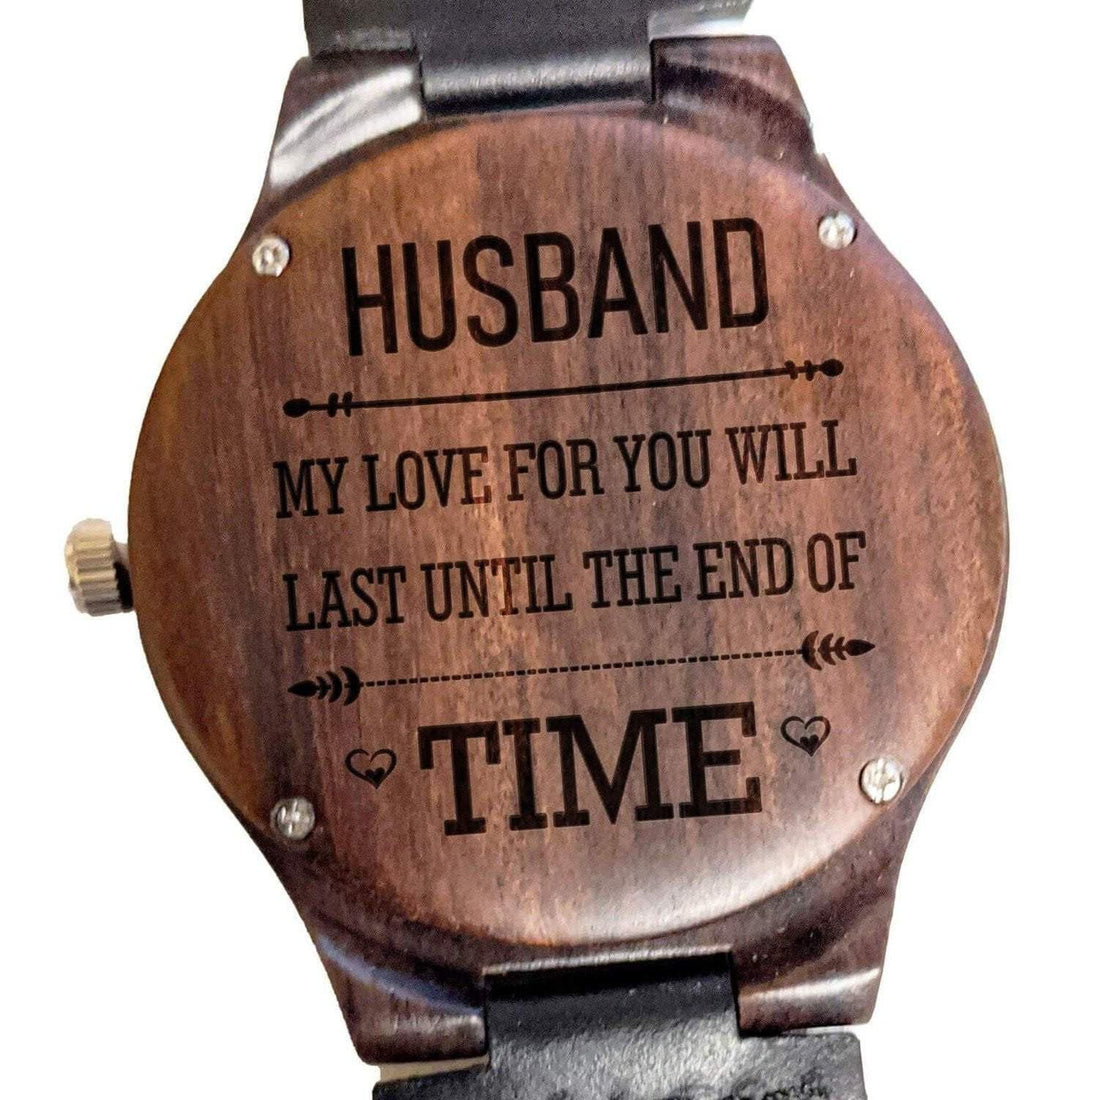 Husband/Boyfriend - "My Love For You Will Last Until The End Of Time" - Dusty Saw